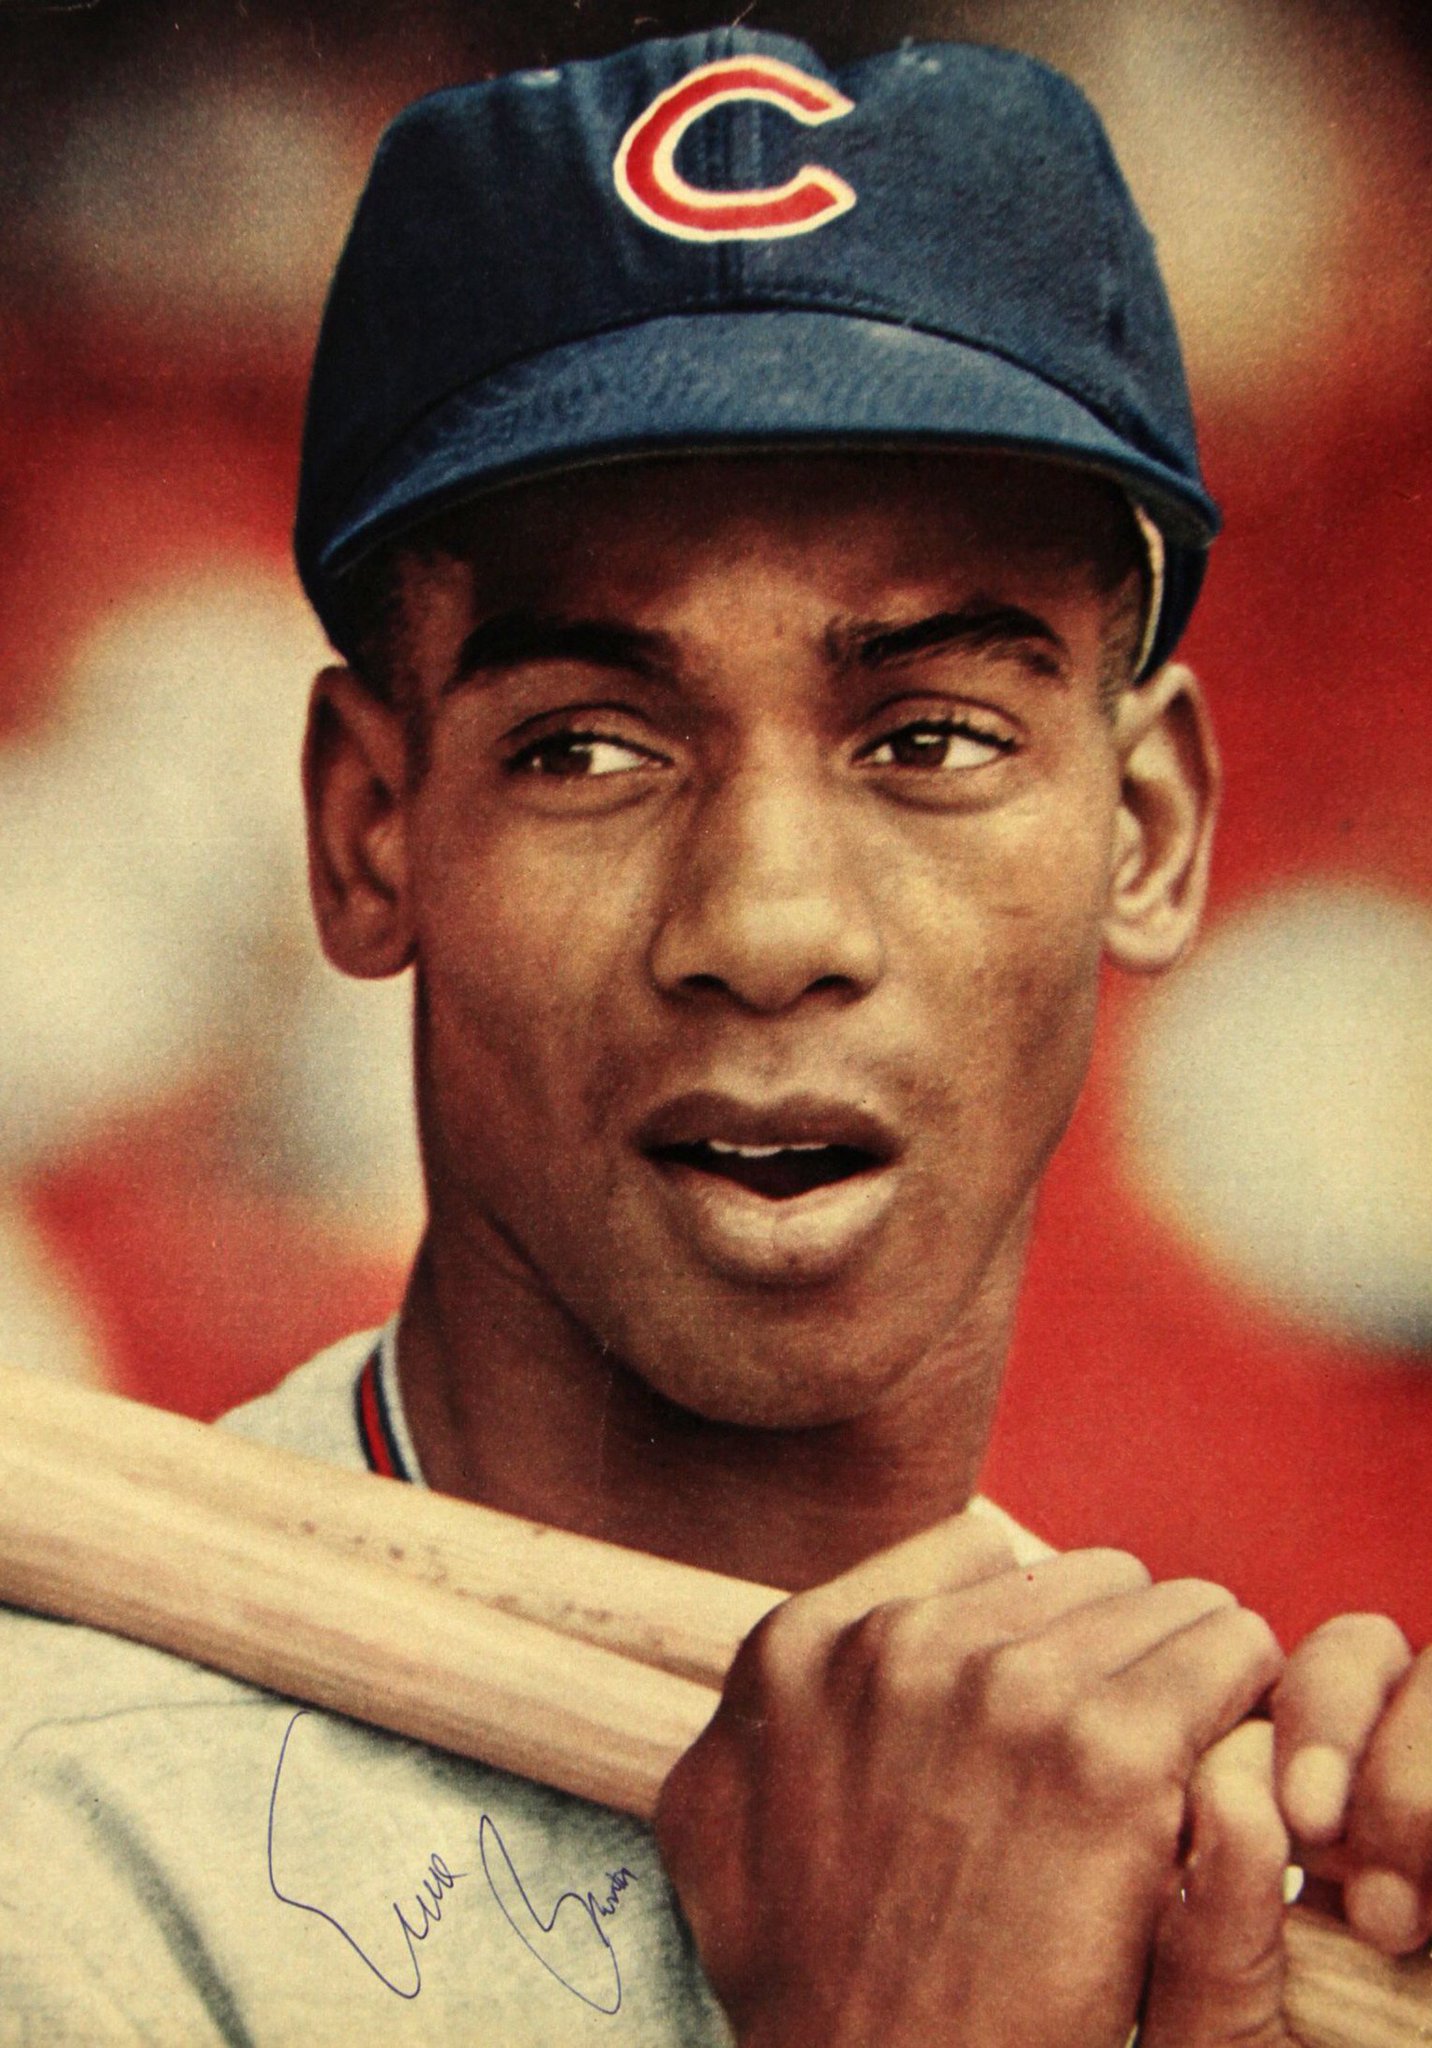 Happy Birthday to our forever Mr. Cub, Ernie Banks! 